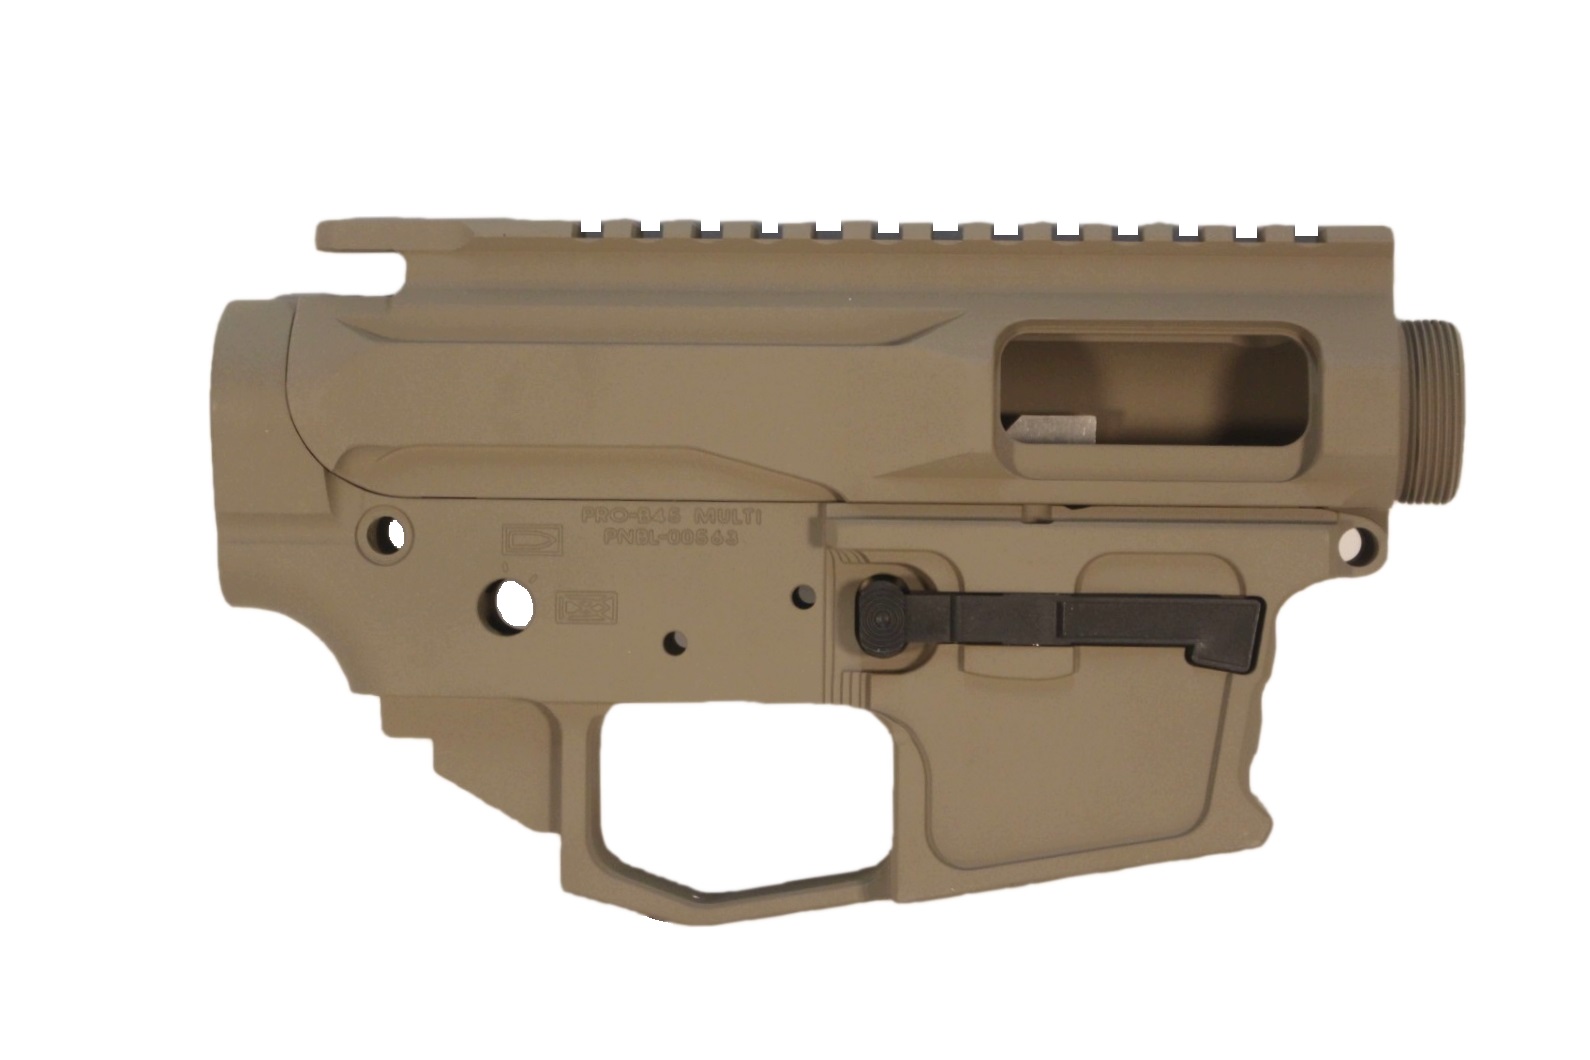 9mm/40 S&W AR-9 Stripped Billet Lower Receiver - Magpul FDE Color By Pro2A Tactical